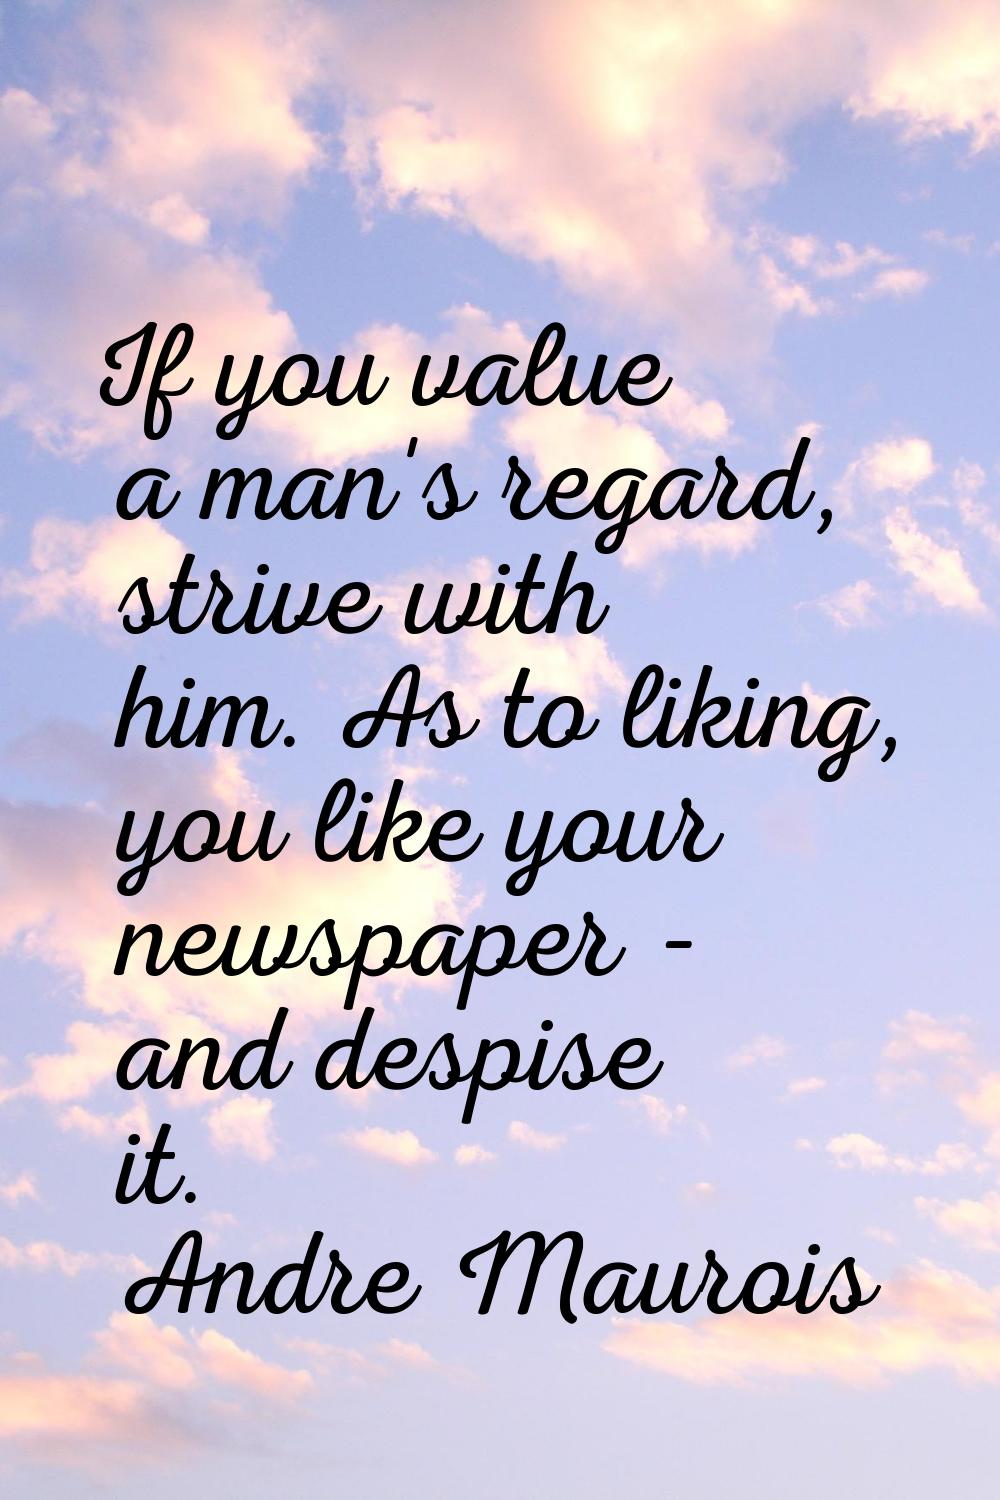 If you value a man's regard, strive with him. As to liking, you like your newspaper - and despise i